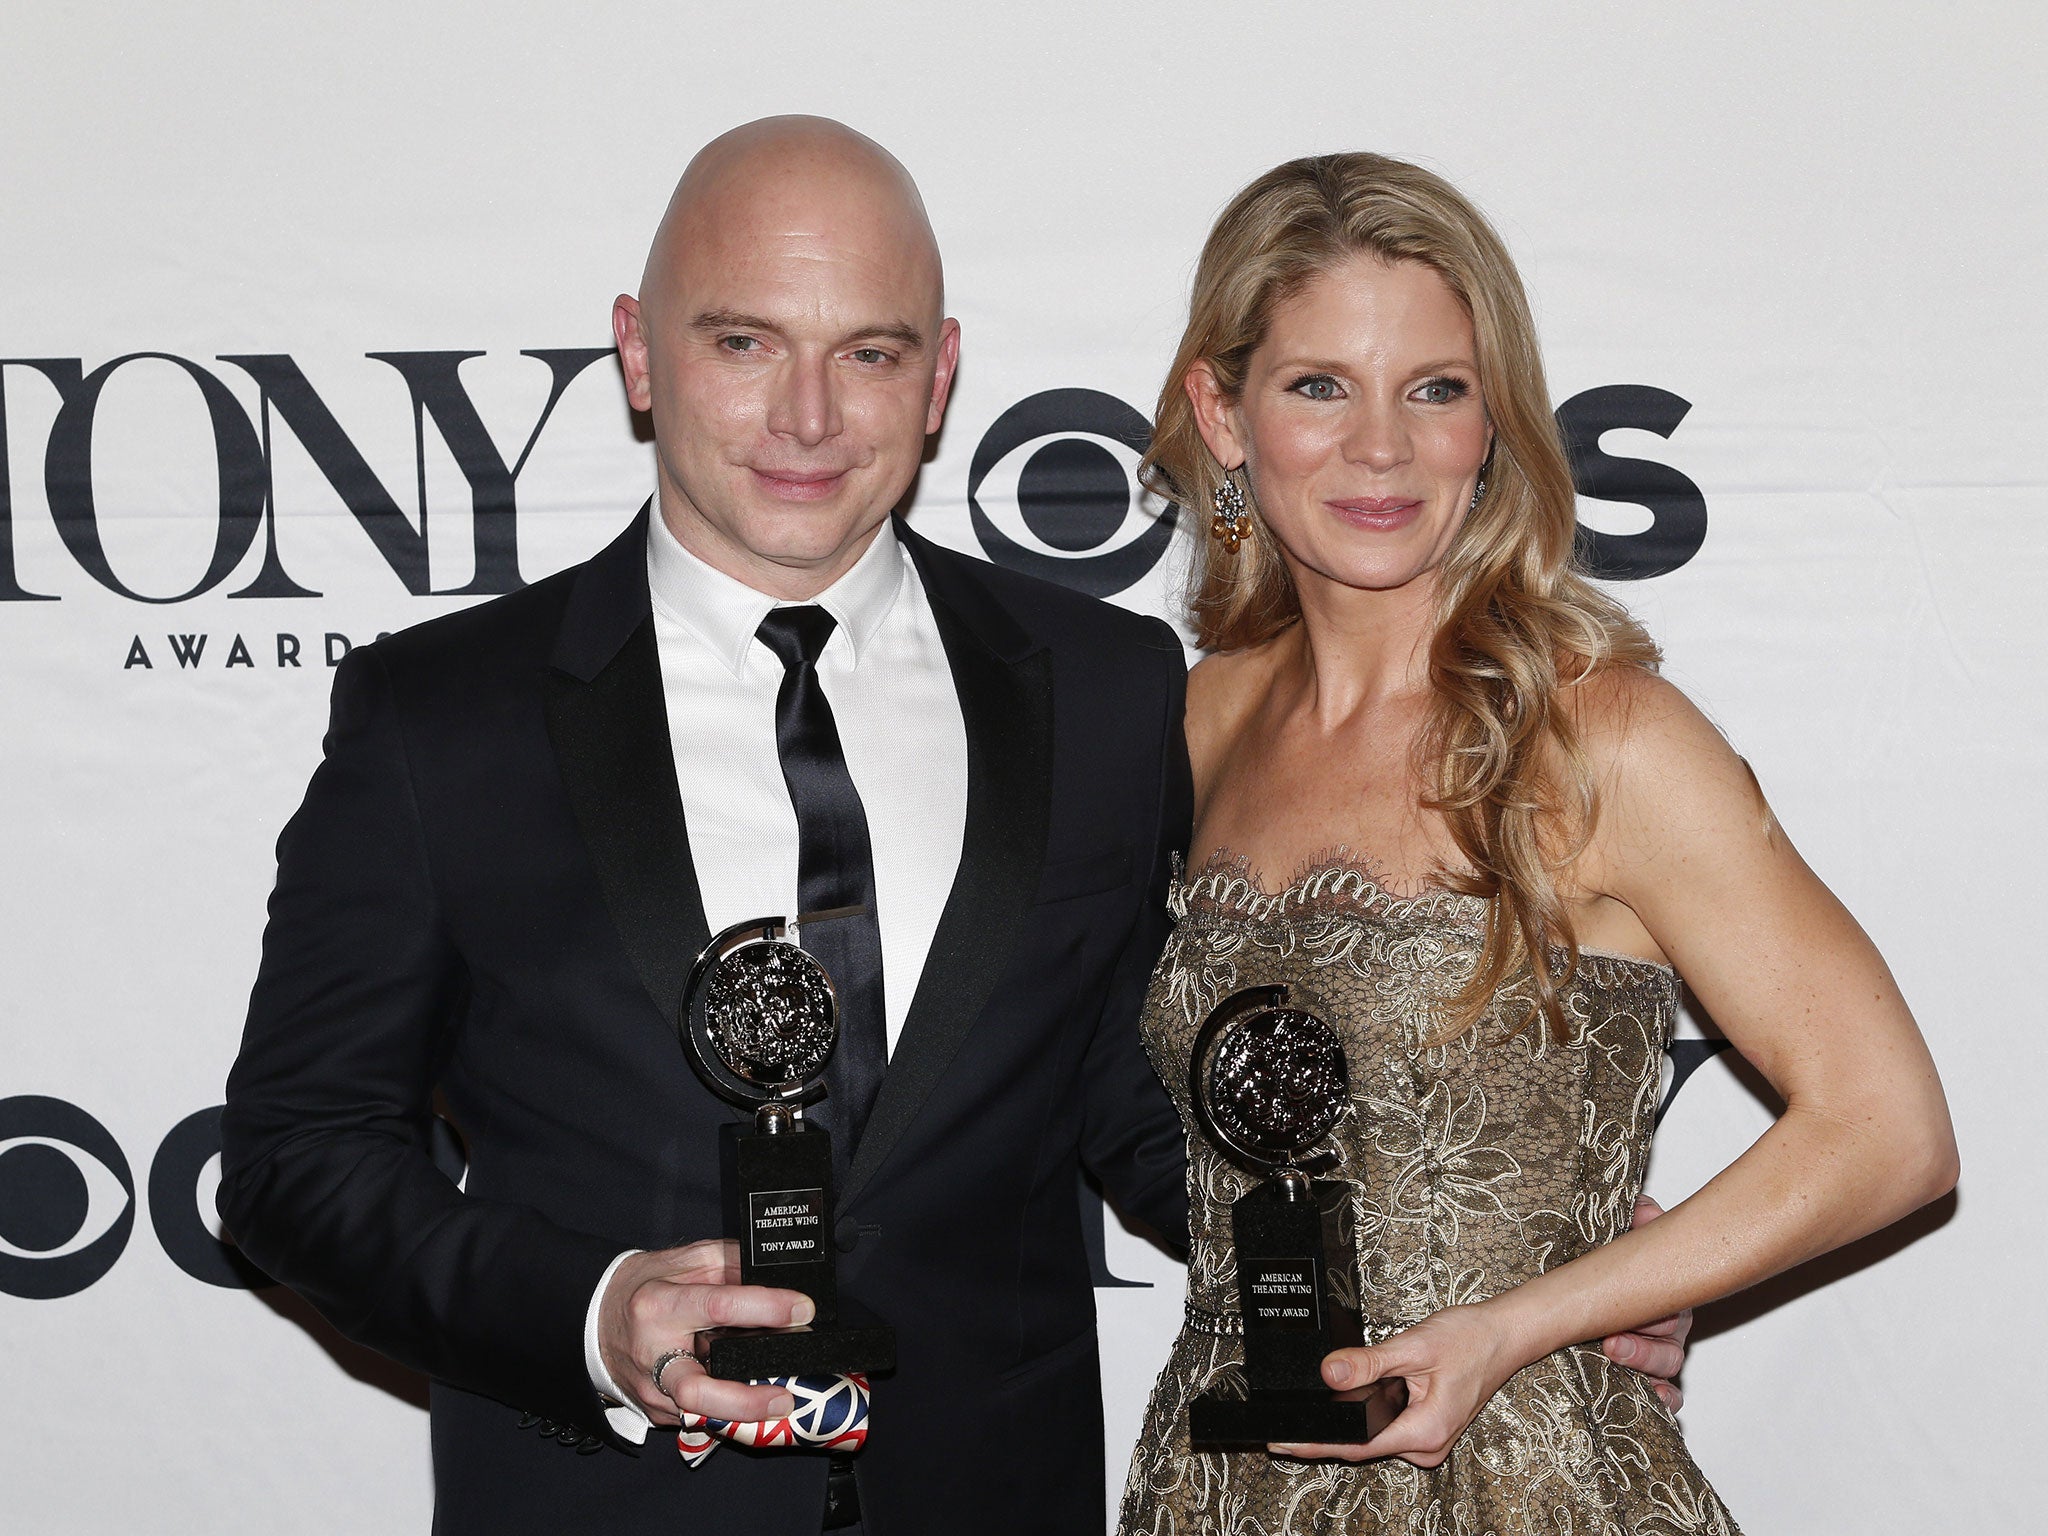 Michael Cerveris, winner of the award for Best Performance by an Actor in a Leading Role in a Musical for 'Fun Home,' and Kelli O'Hara, winner of the award for Best Performance by an Actress in a Leading Role in a Musical for 'The King and I'